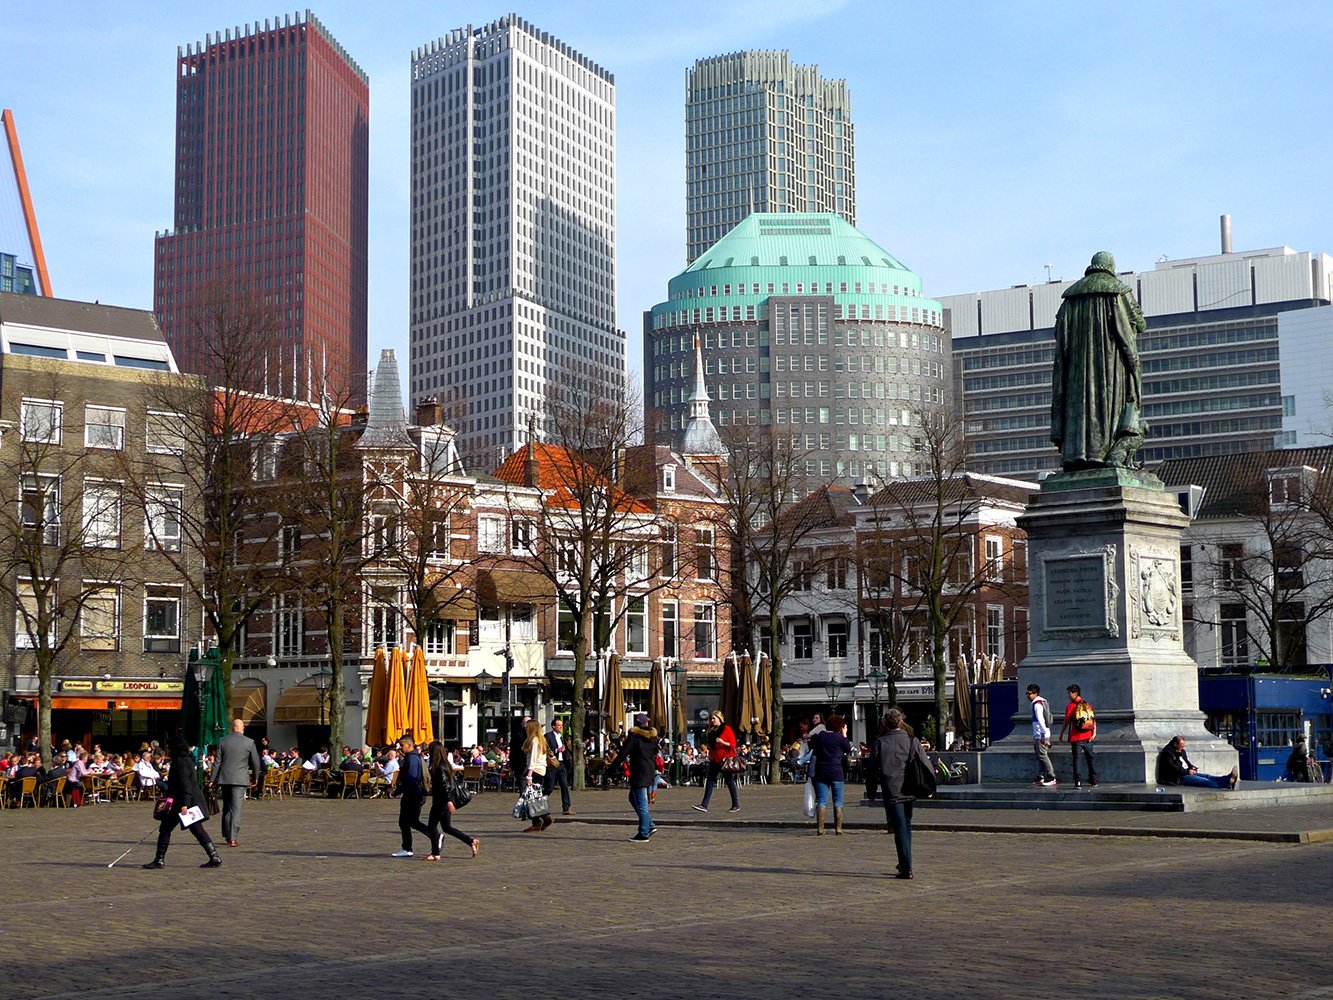 Nice Images Collection: The Hague Desktop Wallpapers